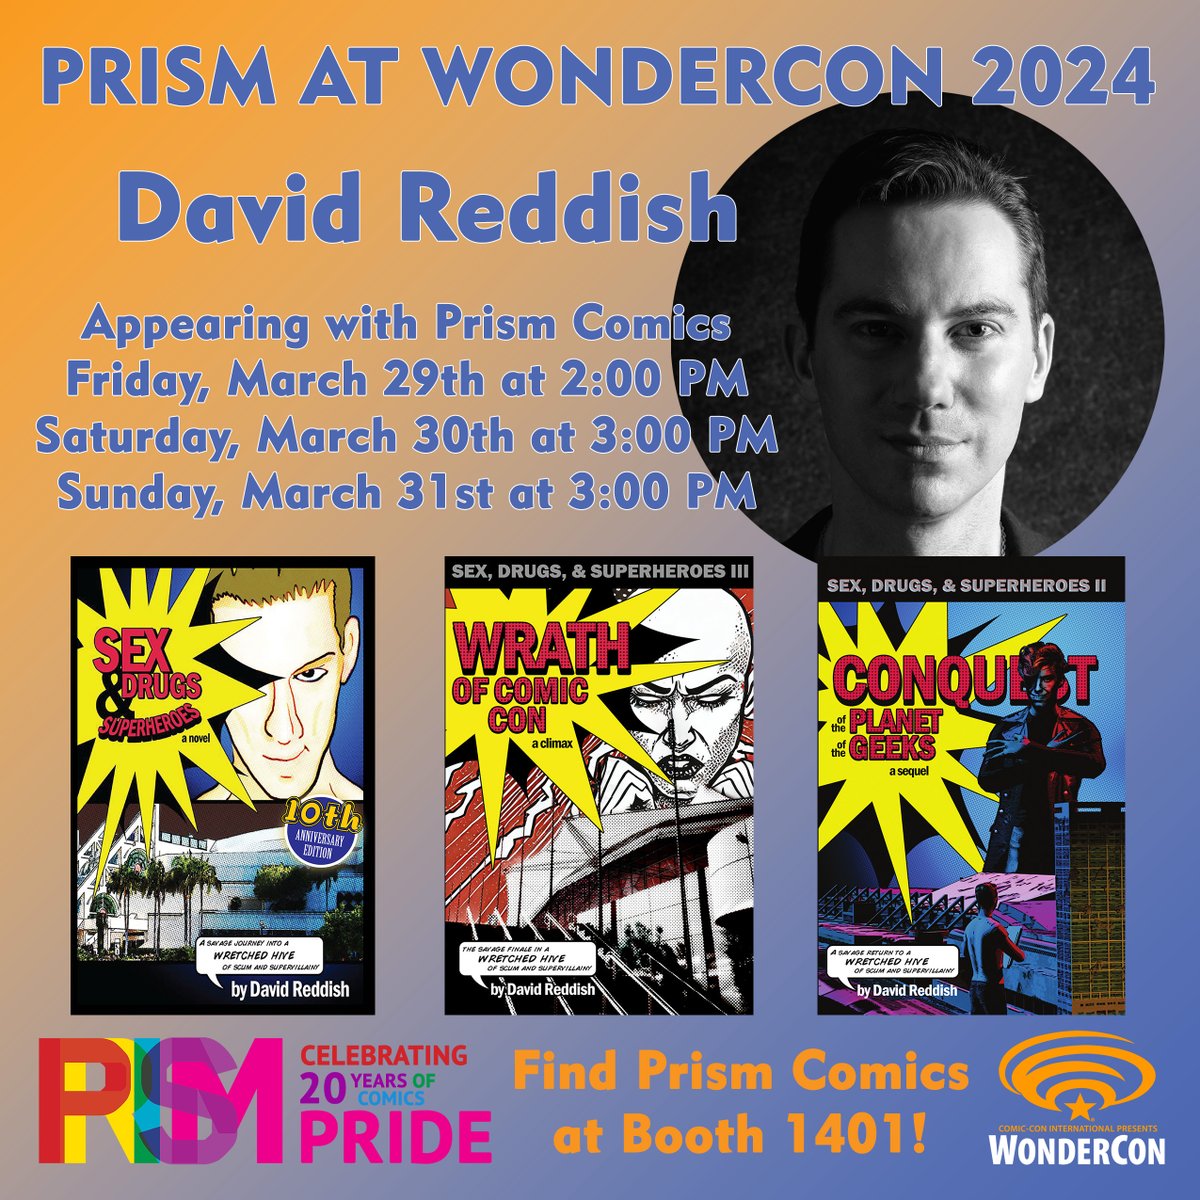 David Reddish, author of Wrath of Comic-Con, will appear with @PrismComics at @WonderCon! Meet him at booth 1401 Friday, March 29 at 2PM, Saturday, March 30 at 3PM, and Sunday, March 31 at 3PM! Don't miss the panel discussion Geek Crossfire: Pop Culture Throwdown Sunday at 1PM!